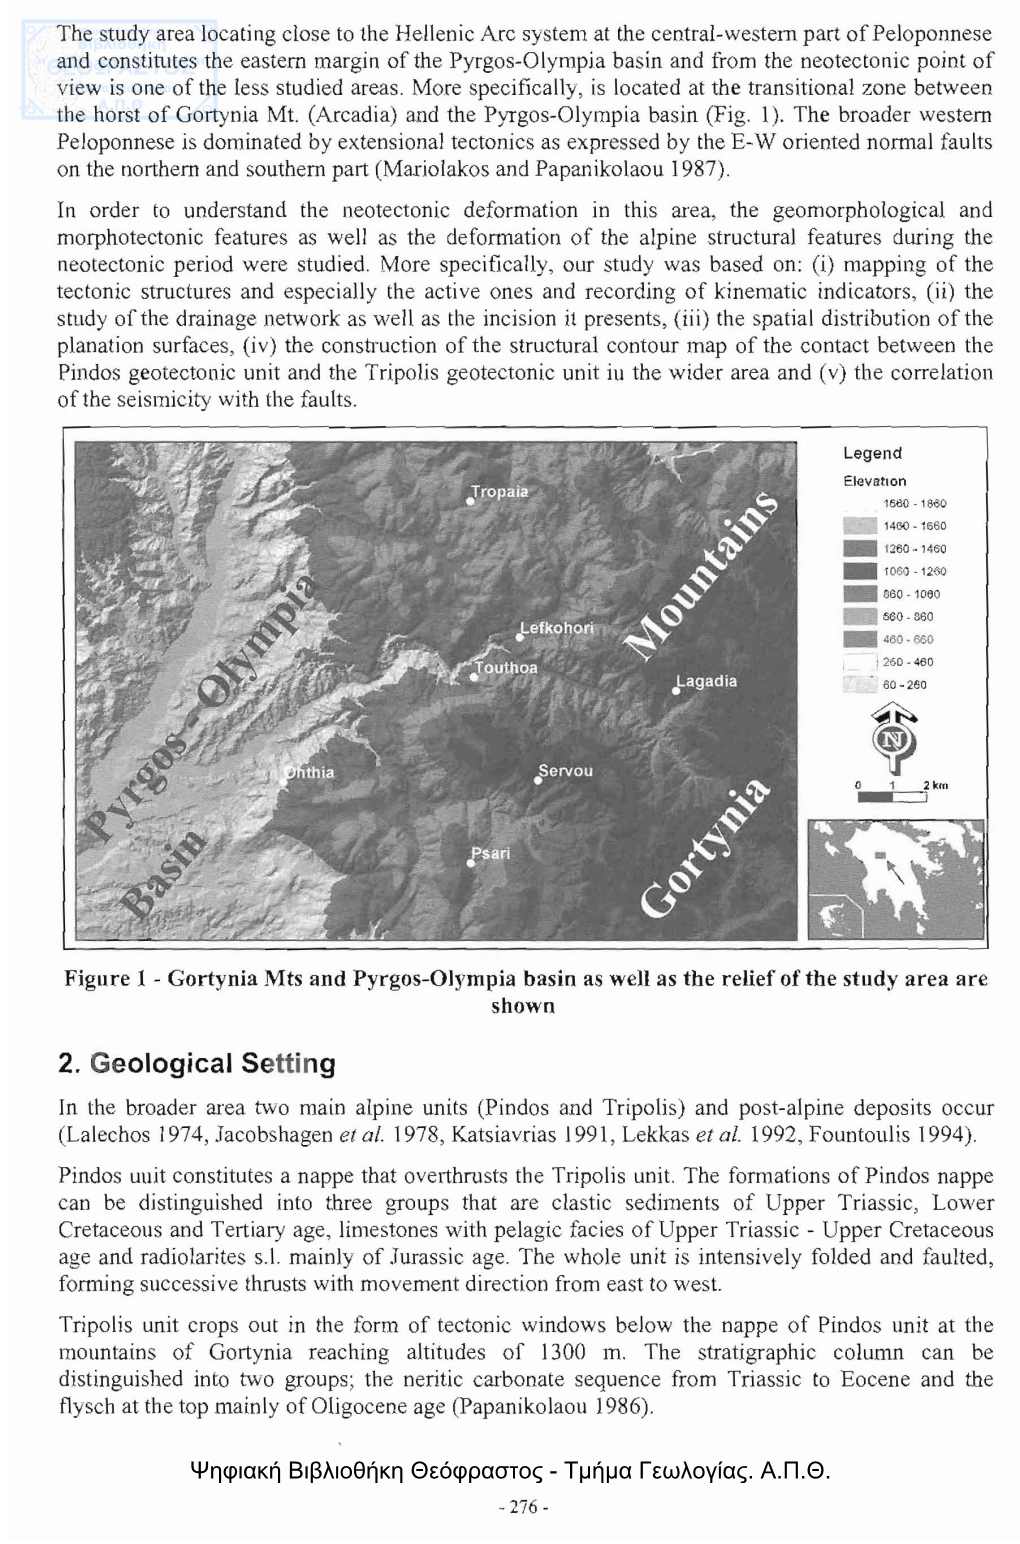 2. Geological Setting in the Broader Area Two Main Alpine Units (Pindos and Tripolis) and Post-Alpine Deposits Occur (Lalechos 1974, Jacobshagen Et Al